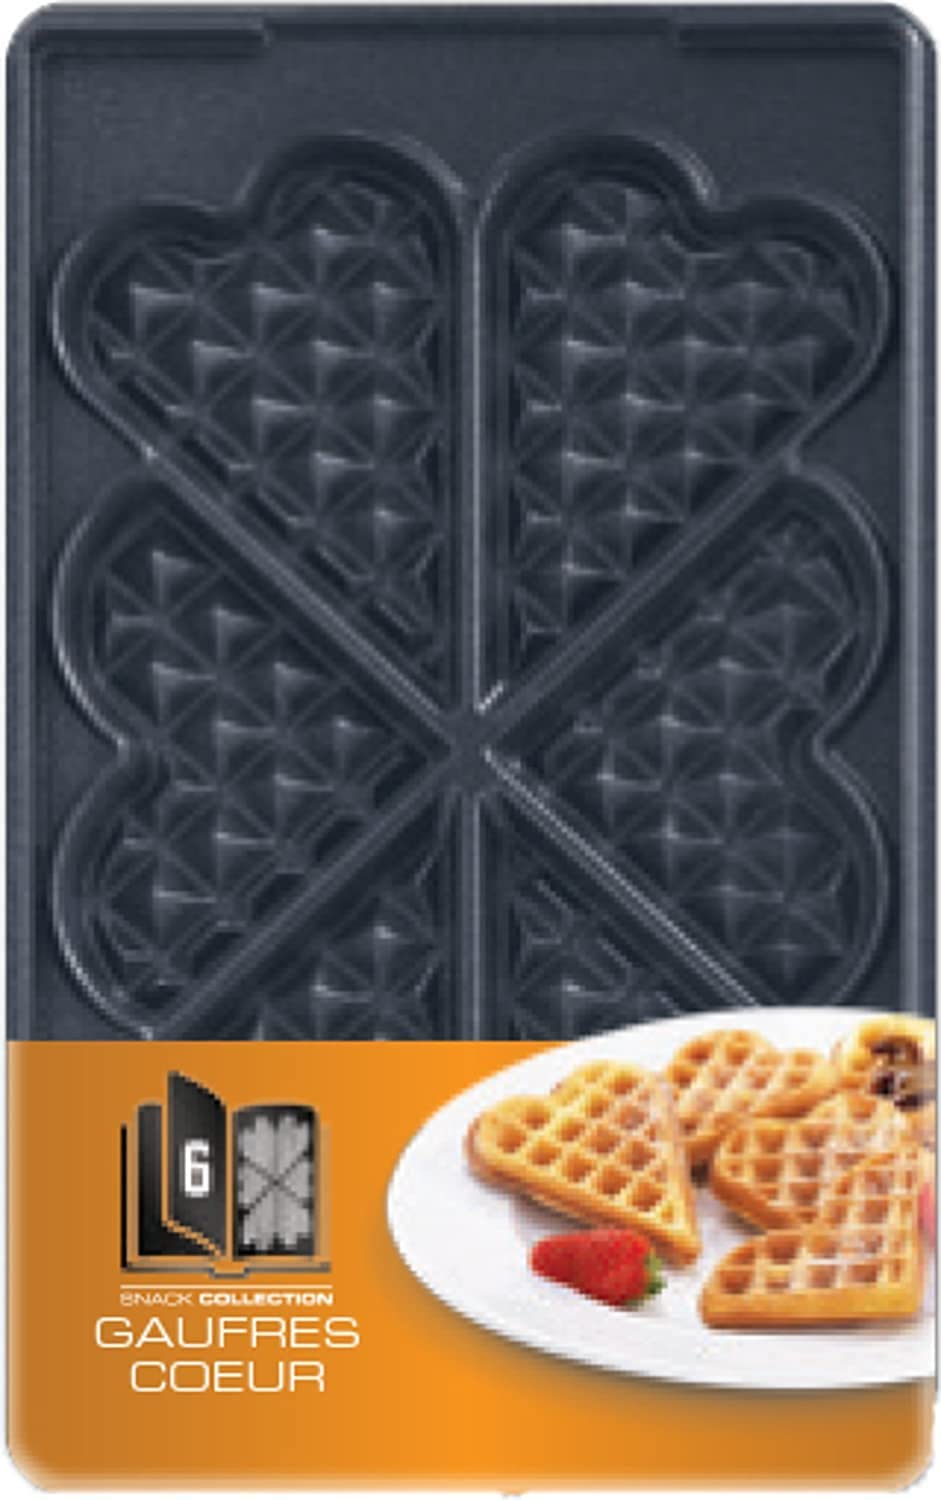 Tefal XA800612 Snack Collection Plate Heart Waffles, Number 6, Heart Shape, Optimal Storage of the Plate Sets thanks to Practical Storage Box